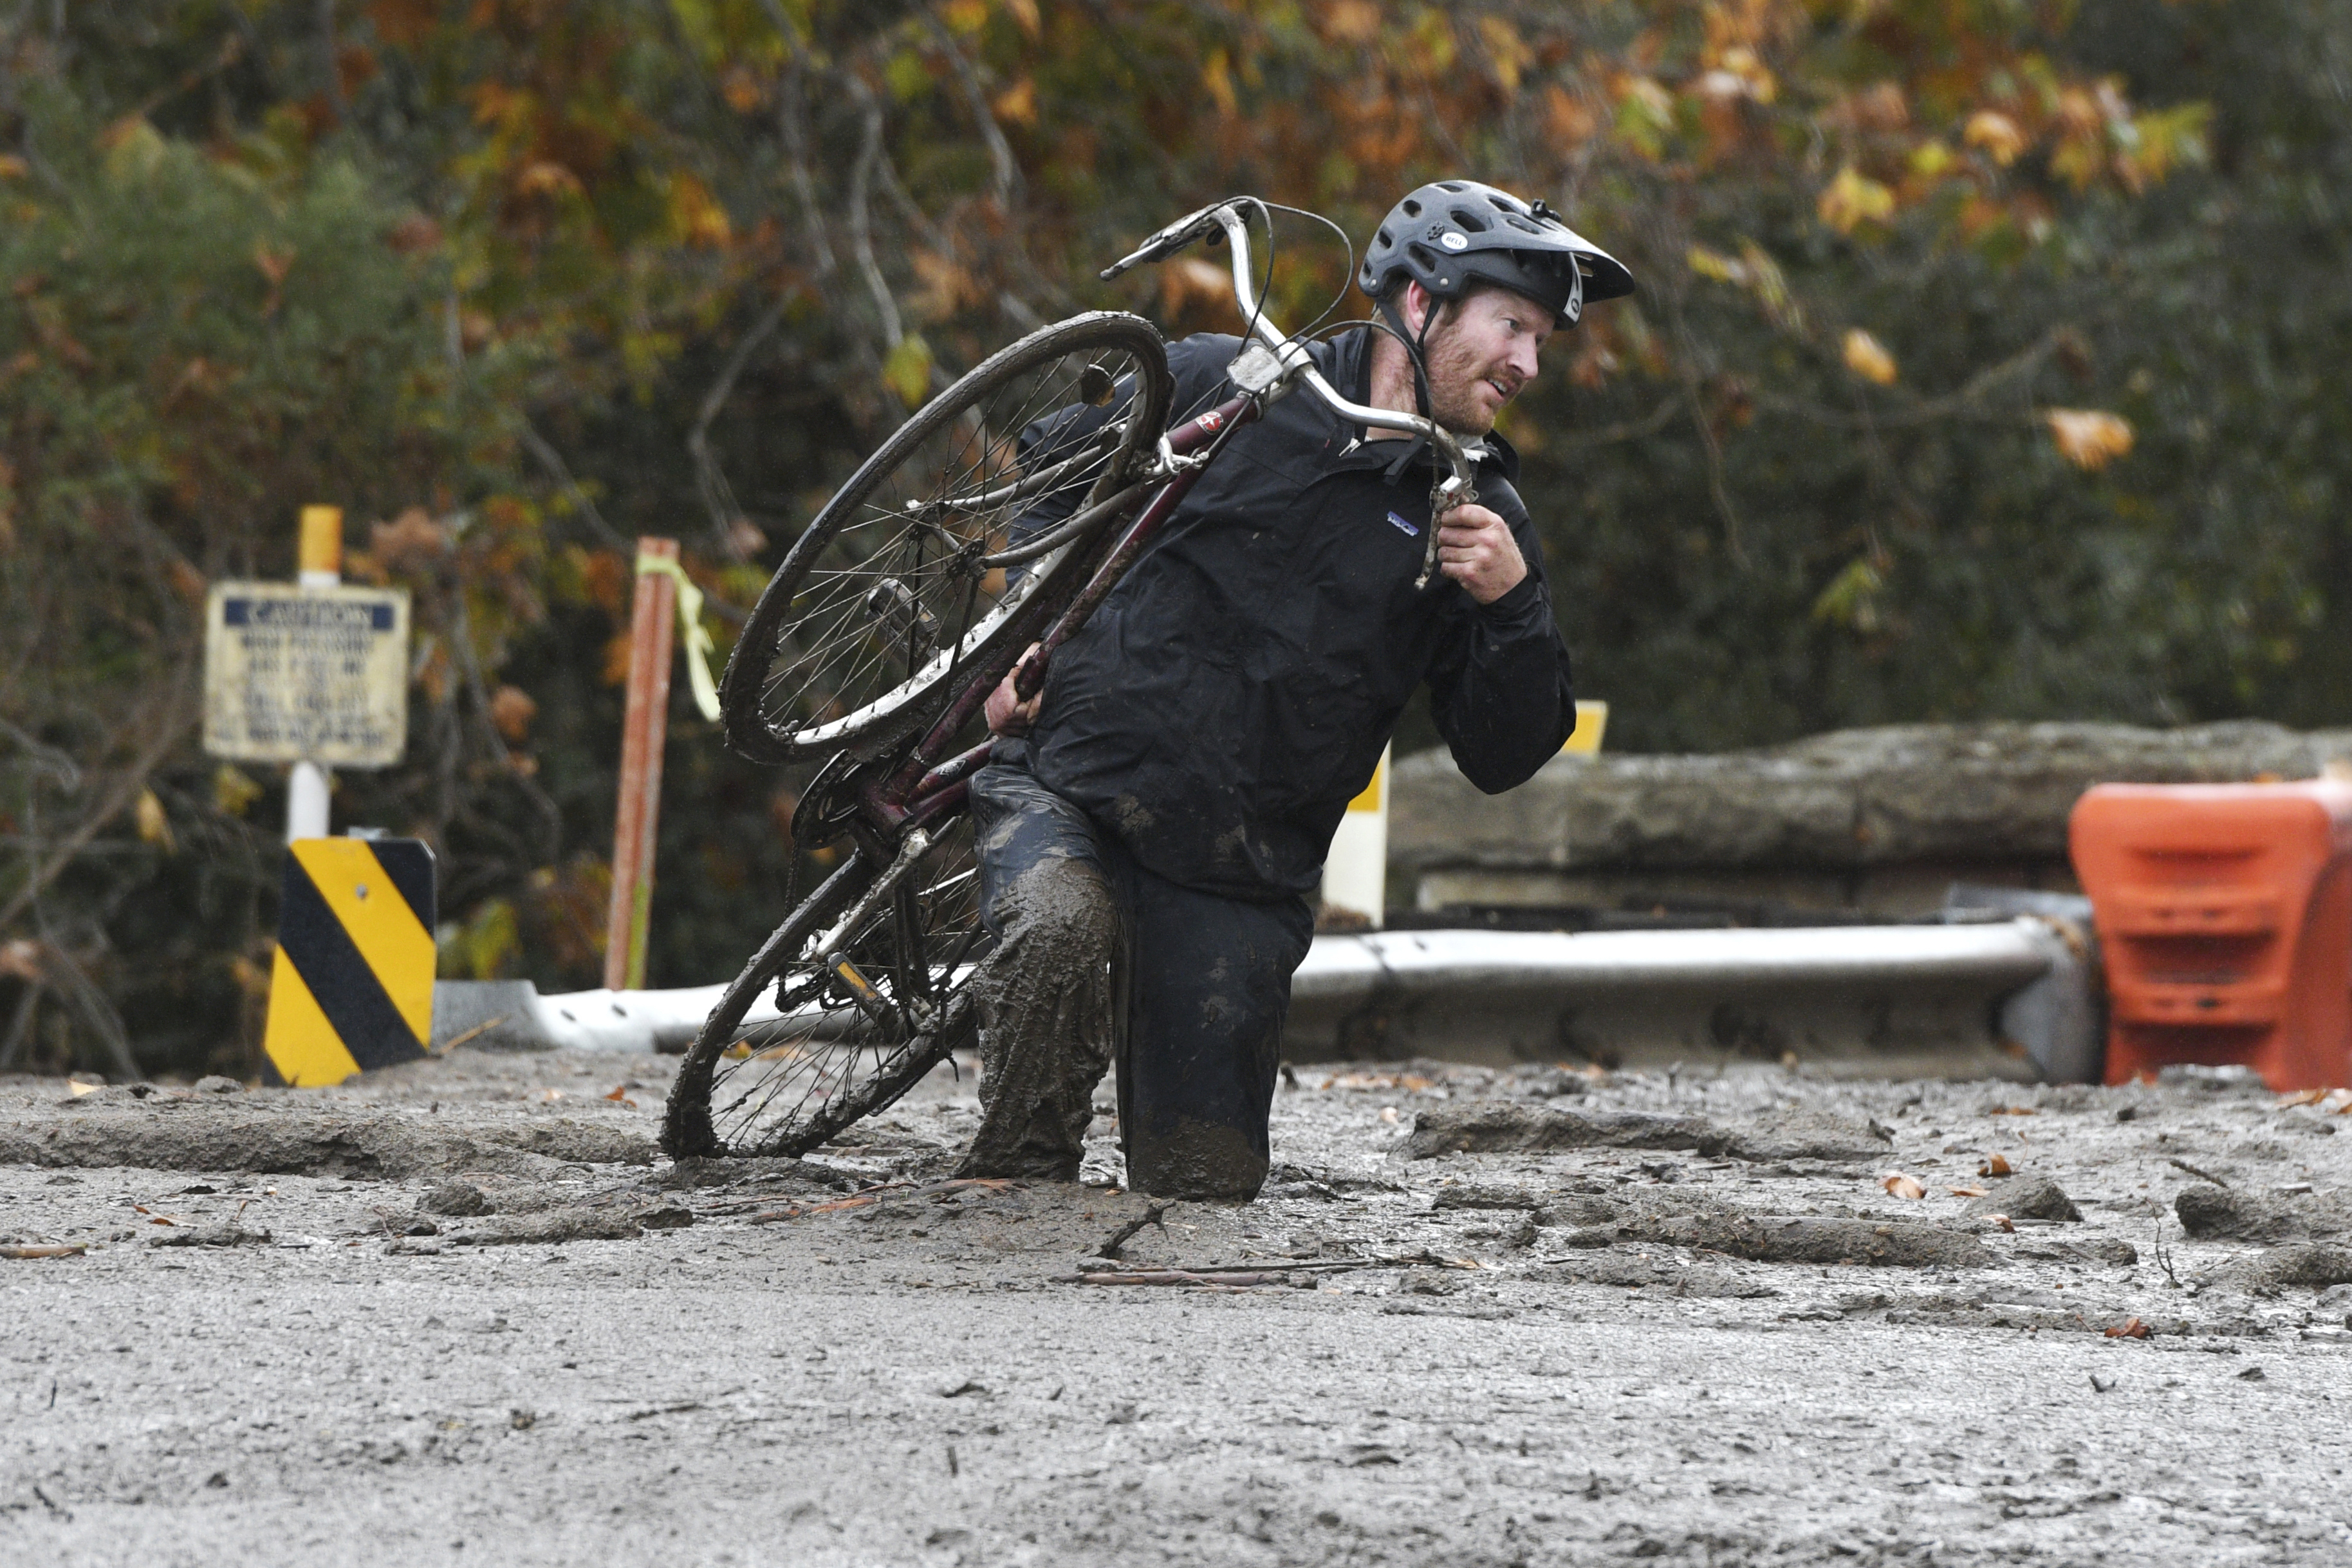 Carpinteria resident Jeff Gallup carries his bike through mud on Foothill Road in Carpinteria, Calif., Tuesday, Jan. 9, 2018. Homes were swept from their foundations as heavy rain sent mud and boulders sliding down hills stripped of vegetation by Southern California's recent wildfires. (AP Photo/Michael Owen Baker)